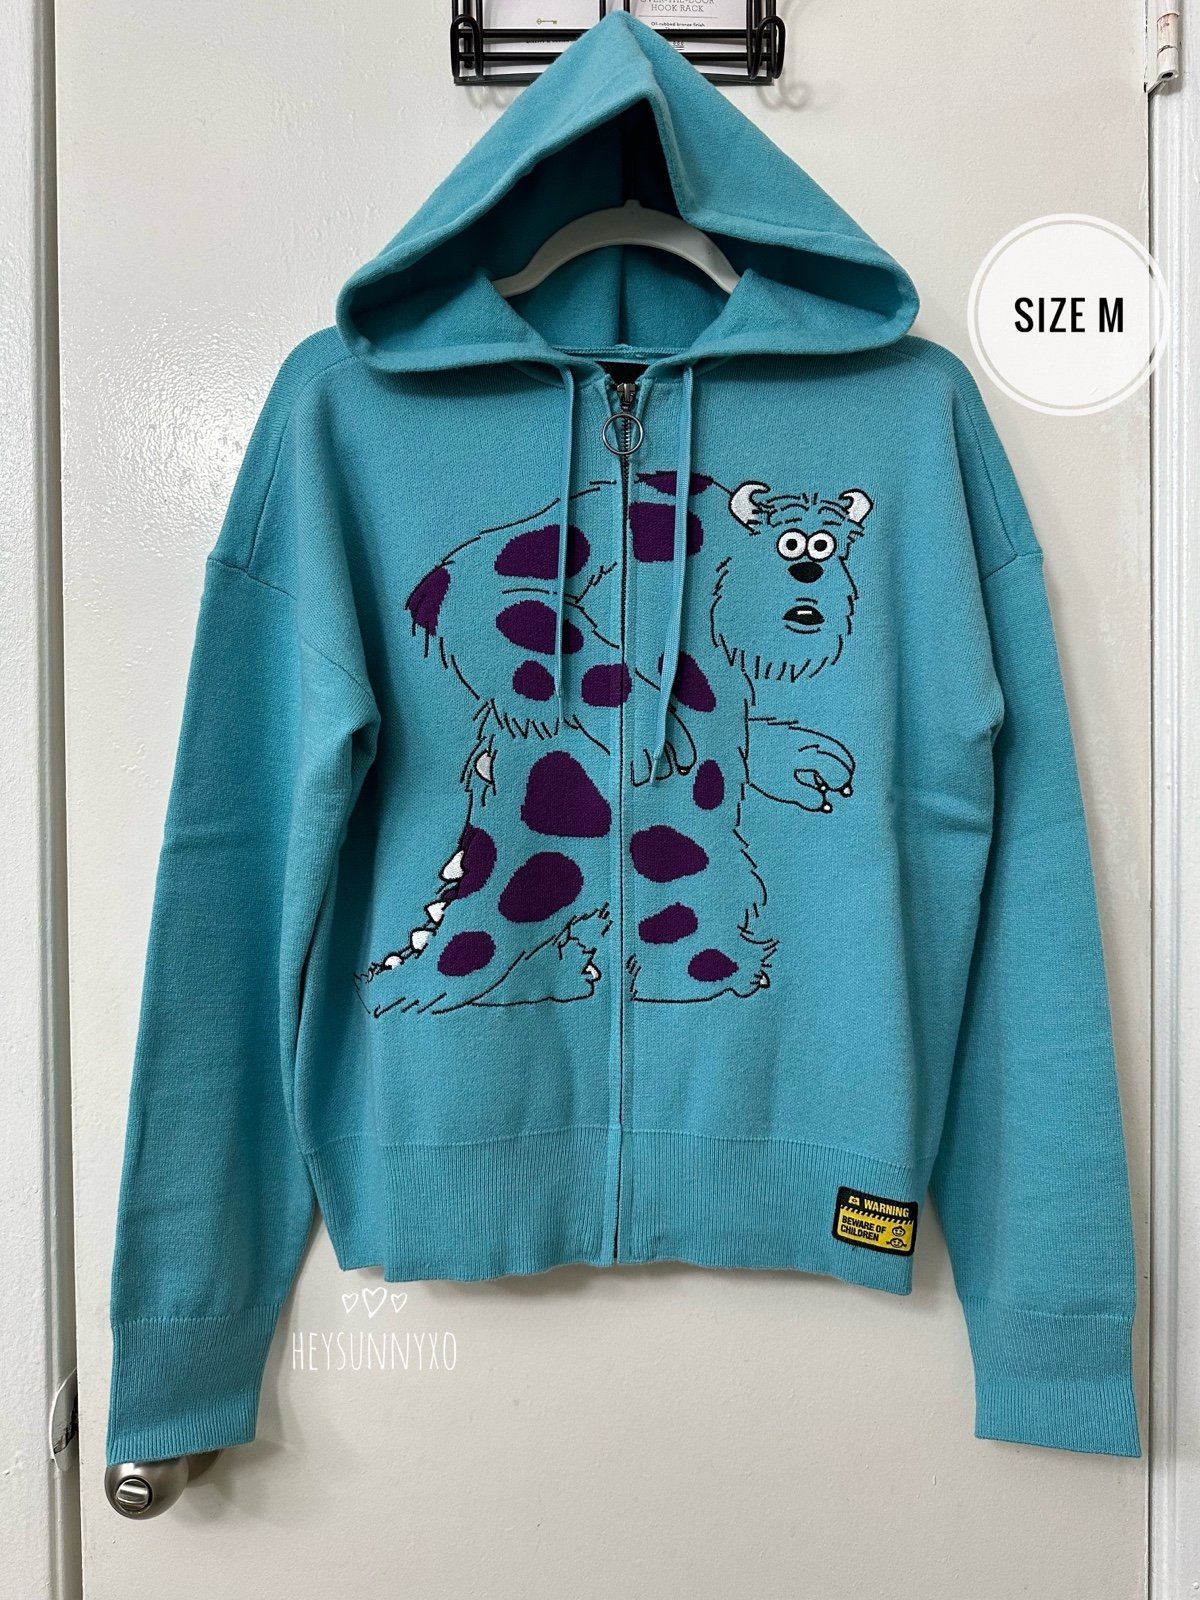 Buy Disney Pixar Monsters, Inc. Sully Women´s Knit Zippered Hoodie Size M meoElsCqp Novel 